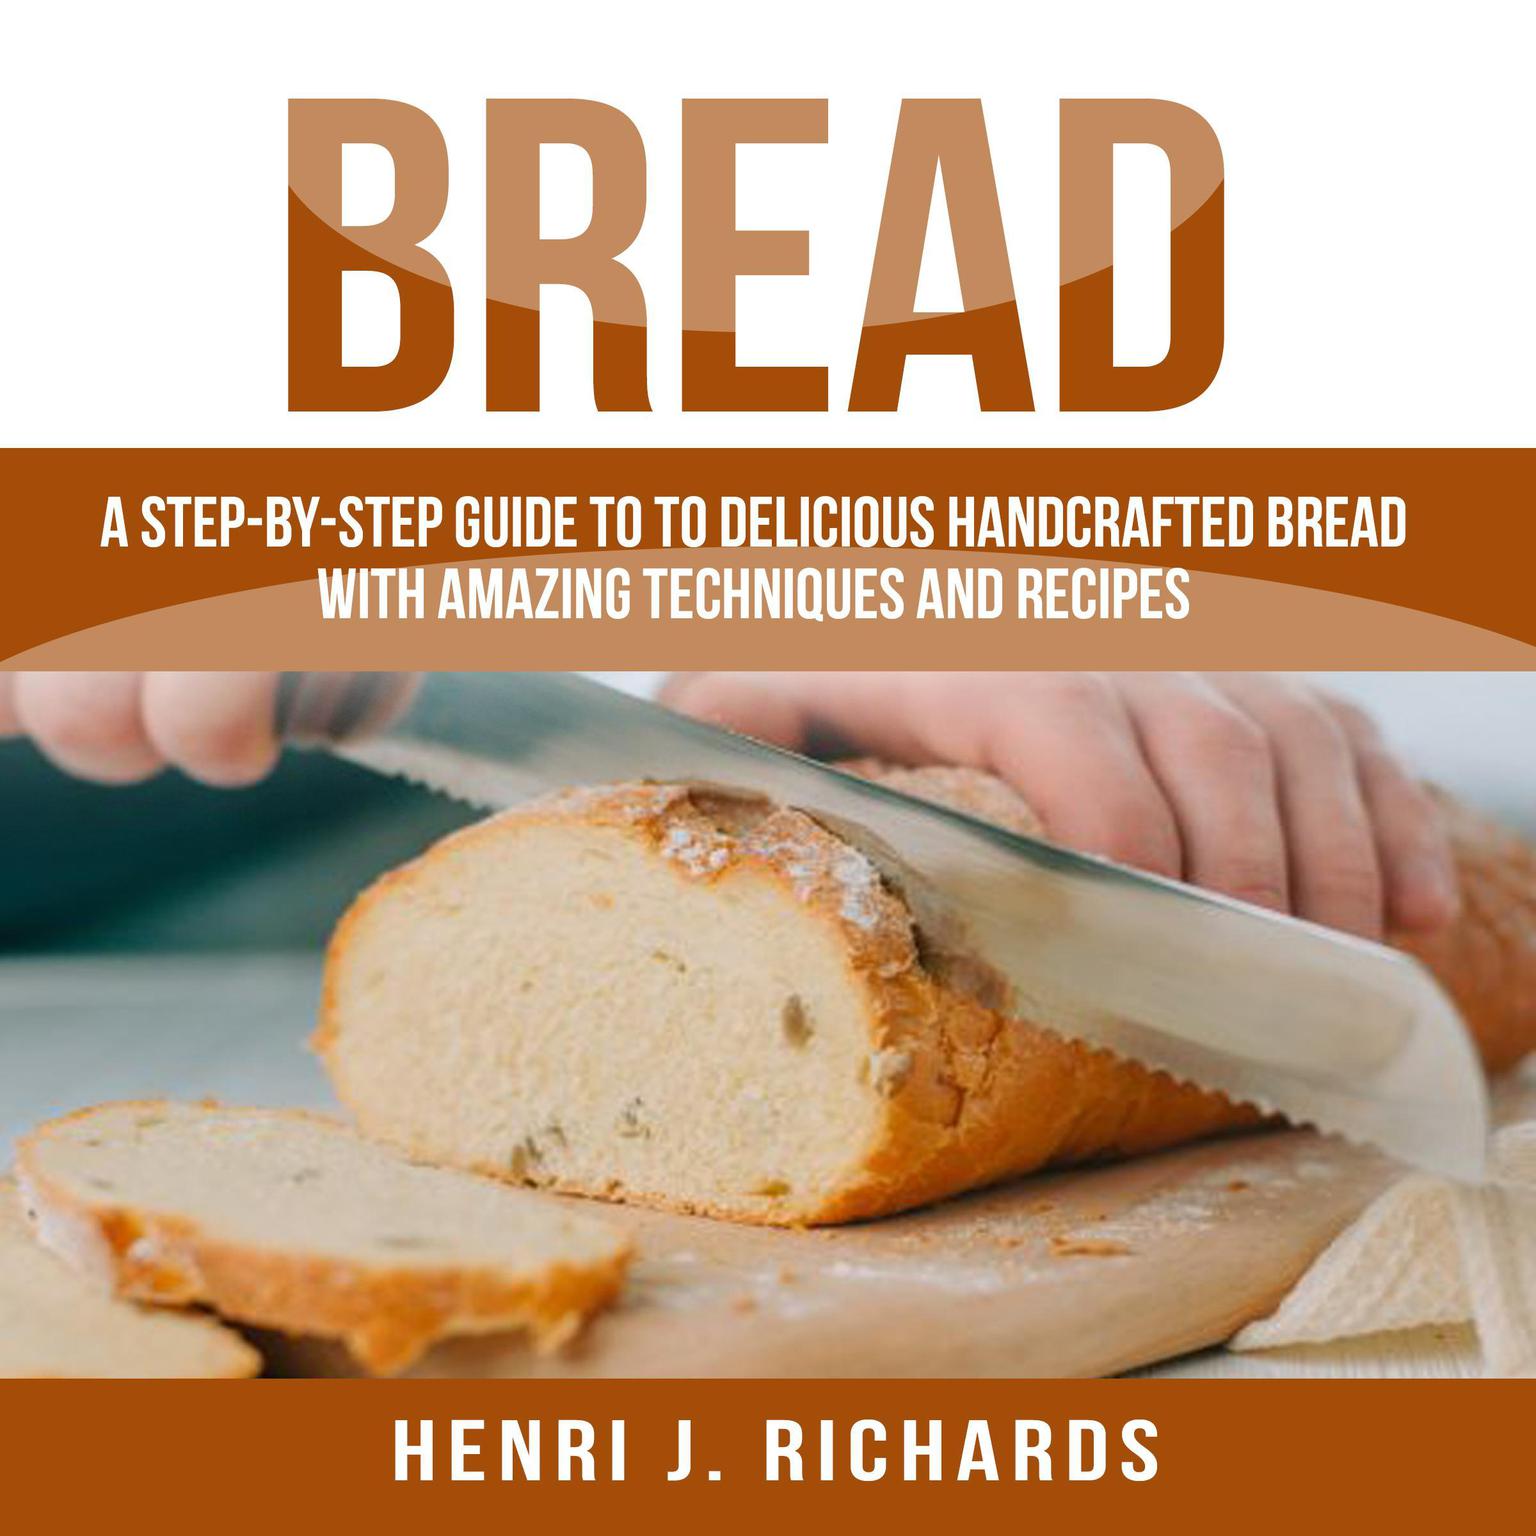 Bread: A Step-By-Step Guide to a Delicious Handcrafted Bread with Amazing Techniques and Recipes Audiobook, by Henri J. Richards